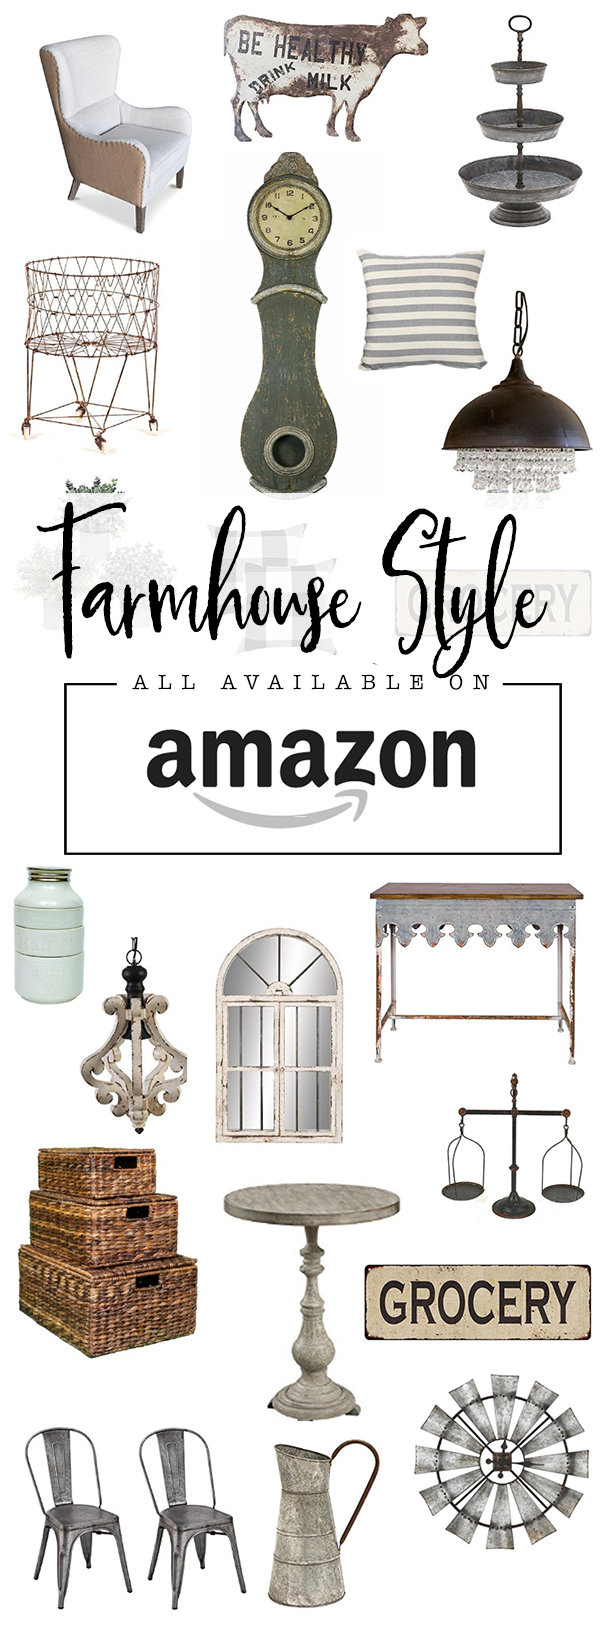 Farmhouse Style Finds All from Amazon -   9 home accessories Design fixer upper ideas